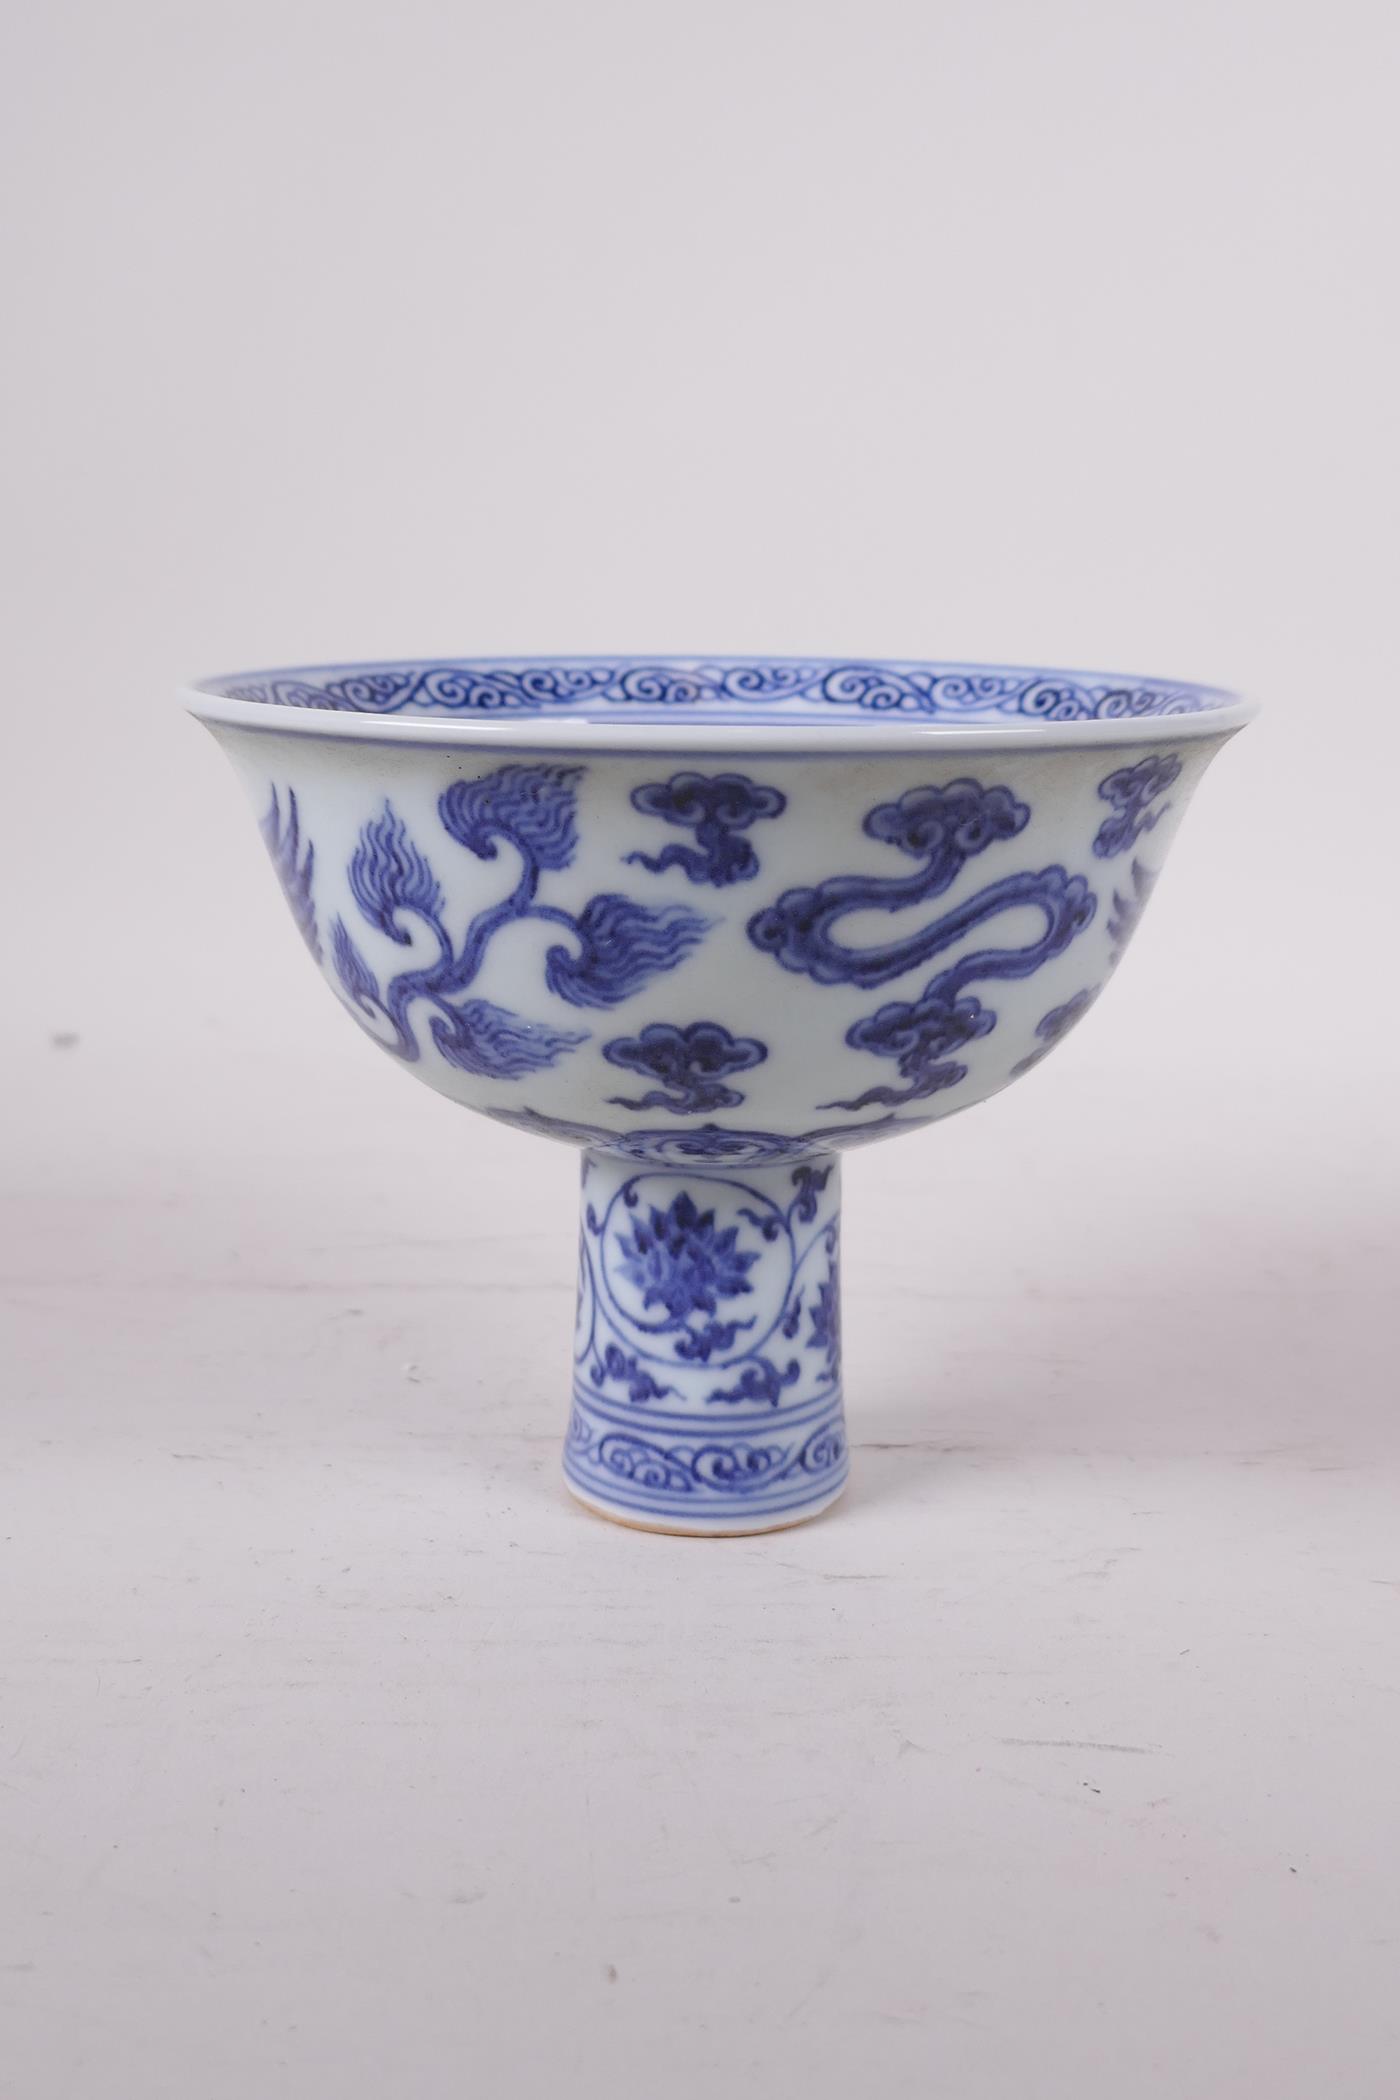 A Ming style blue and white porcelain stem bowl with phoenix decoration, Chinese, 4" high x 5" - Image 2 of 5